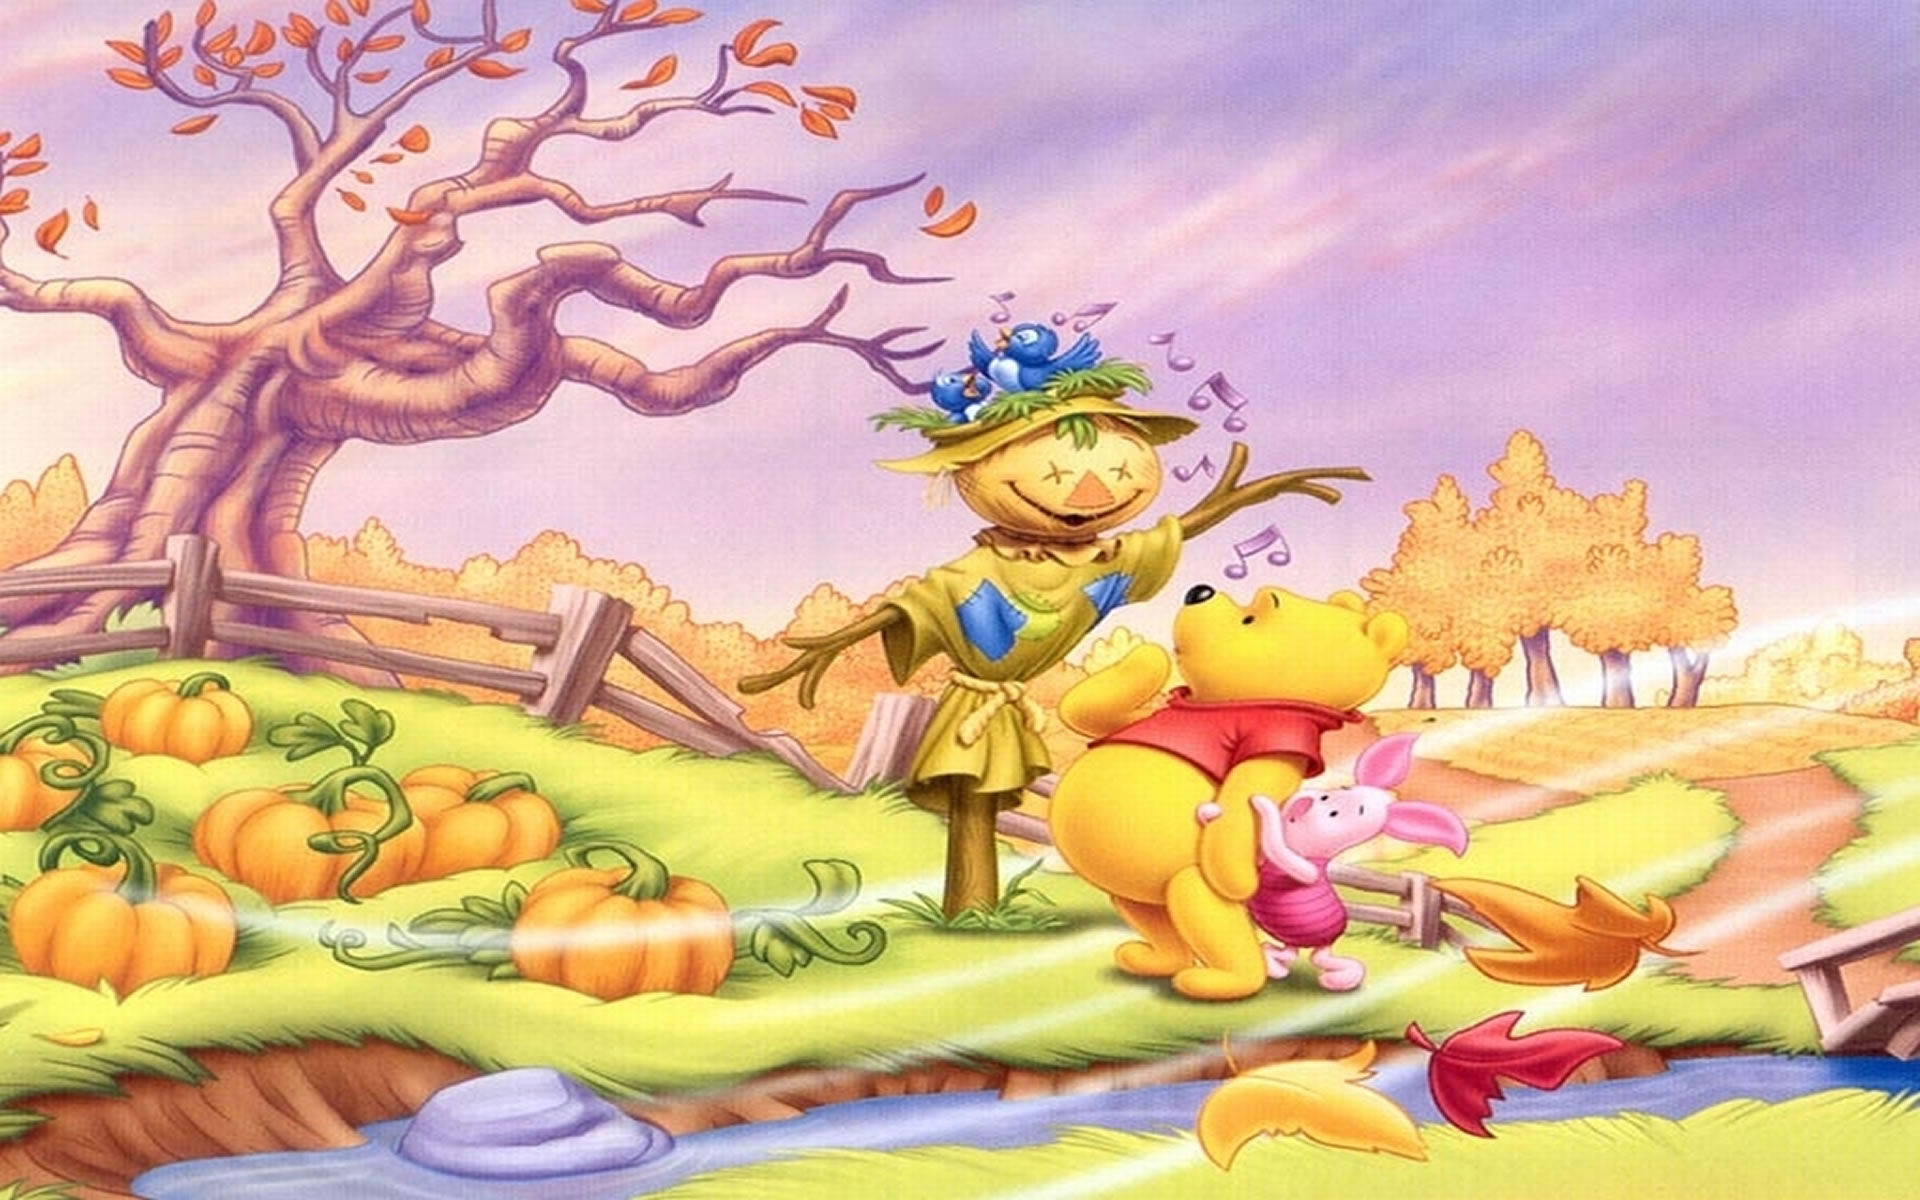 83 Winnie The Pooh HD Wallpapers | Backgrounds - Wallpaper Abyss